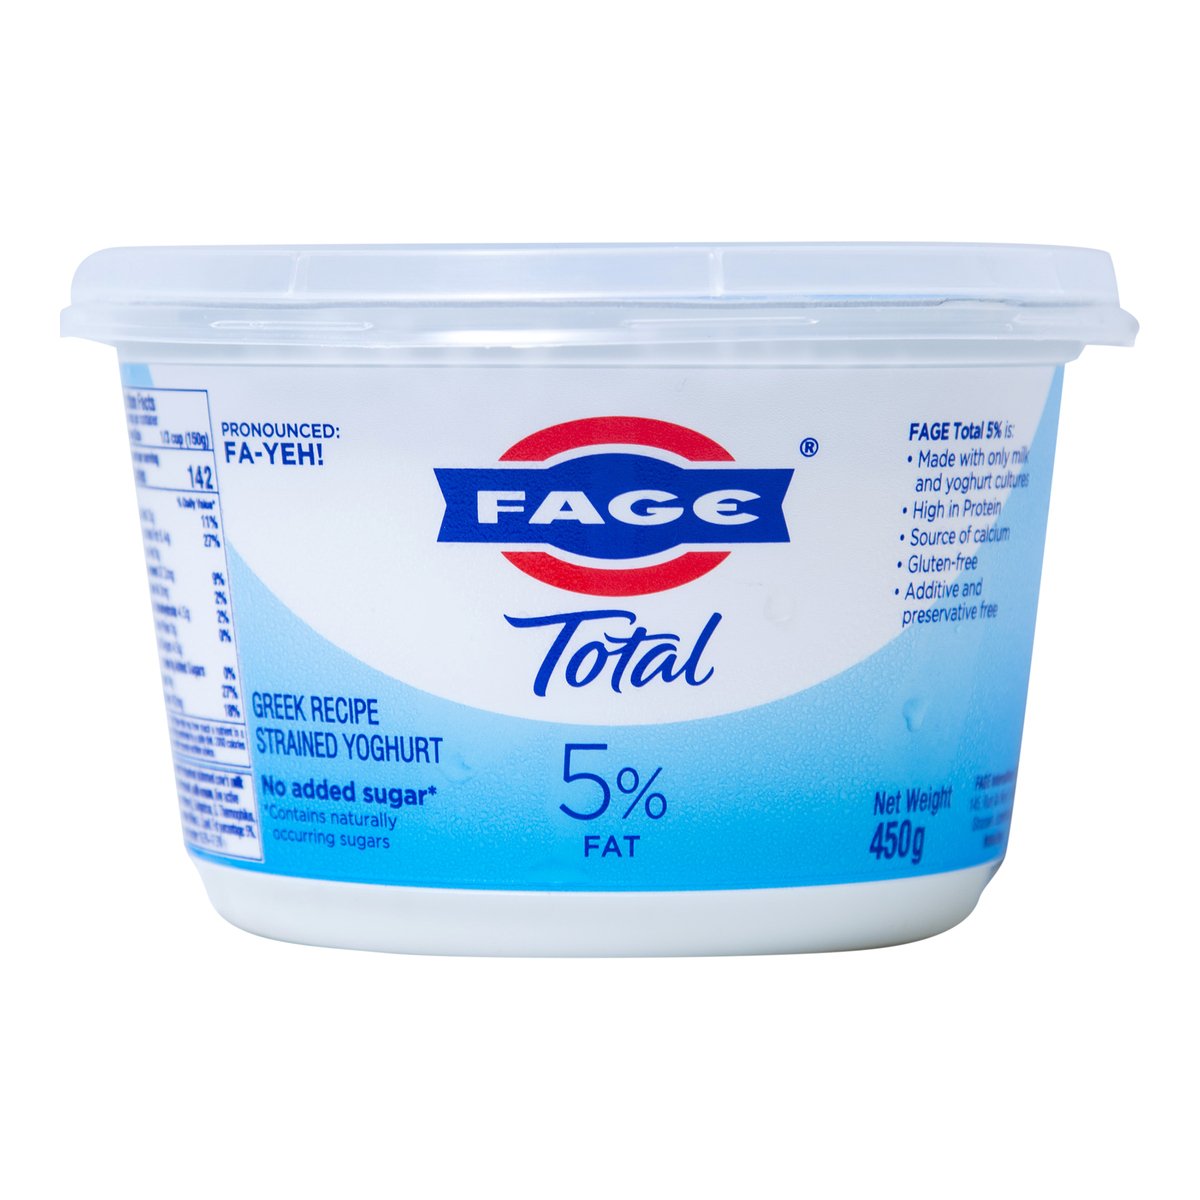 Fage Total 5% Fat Strained Yoghurt 450 g